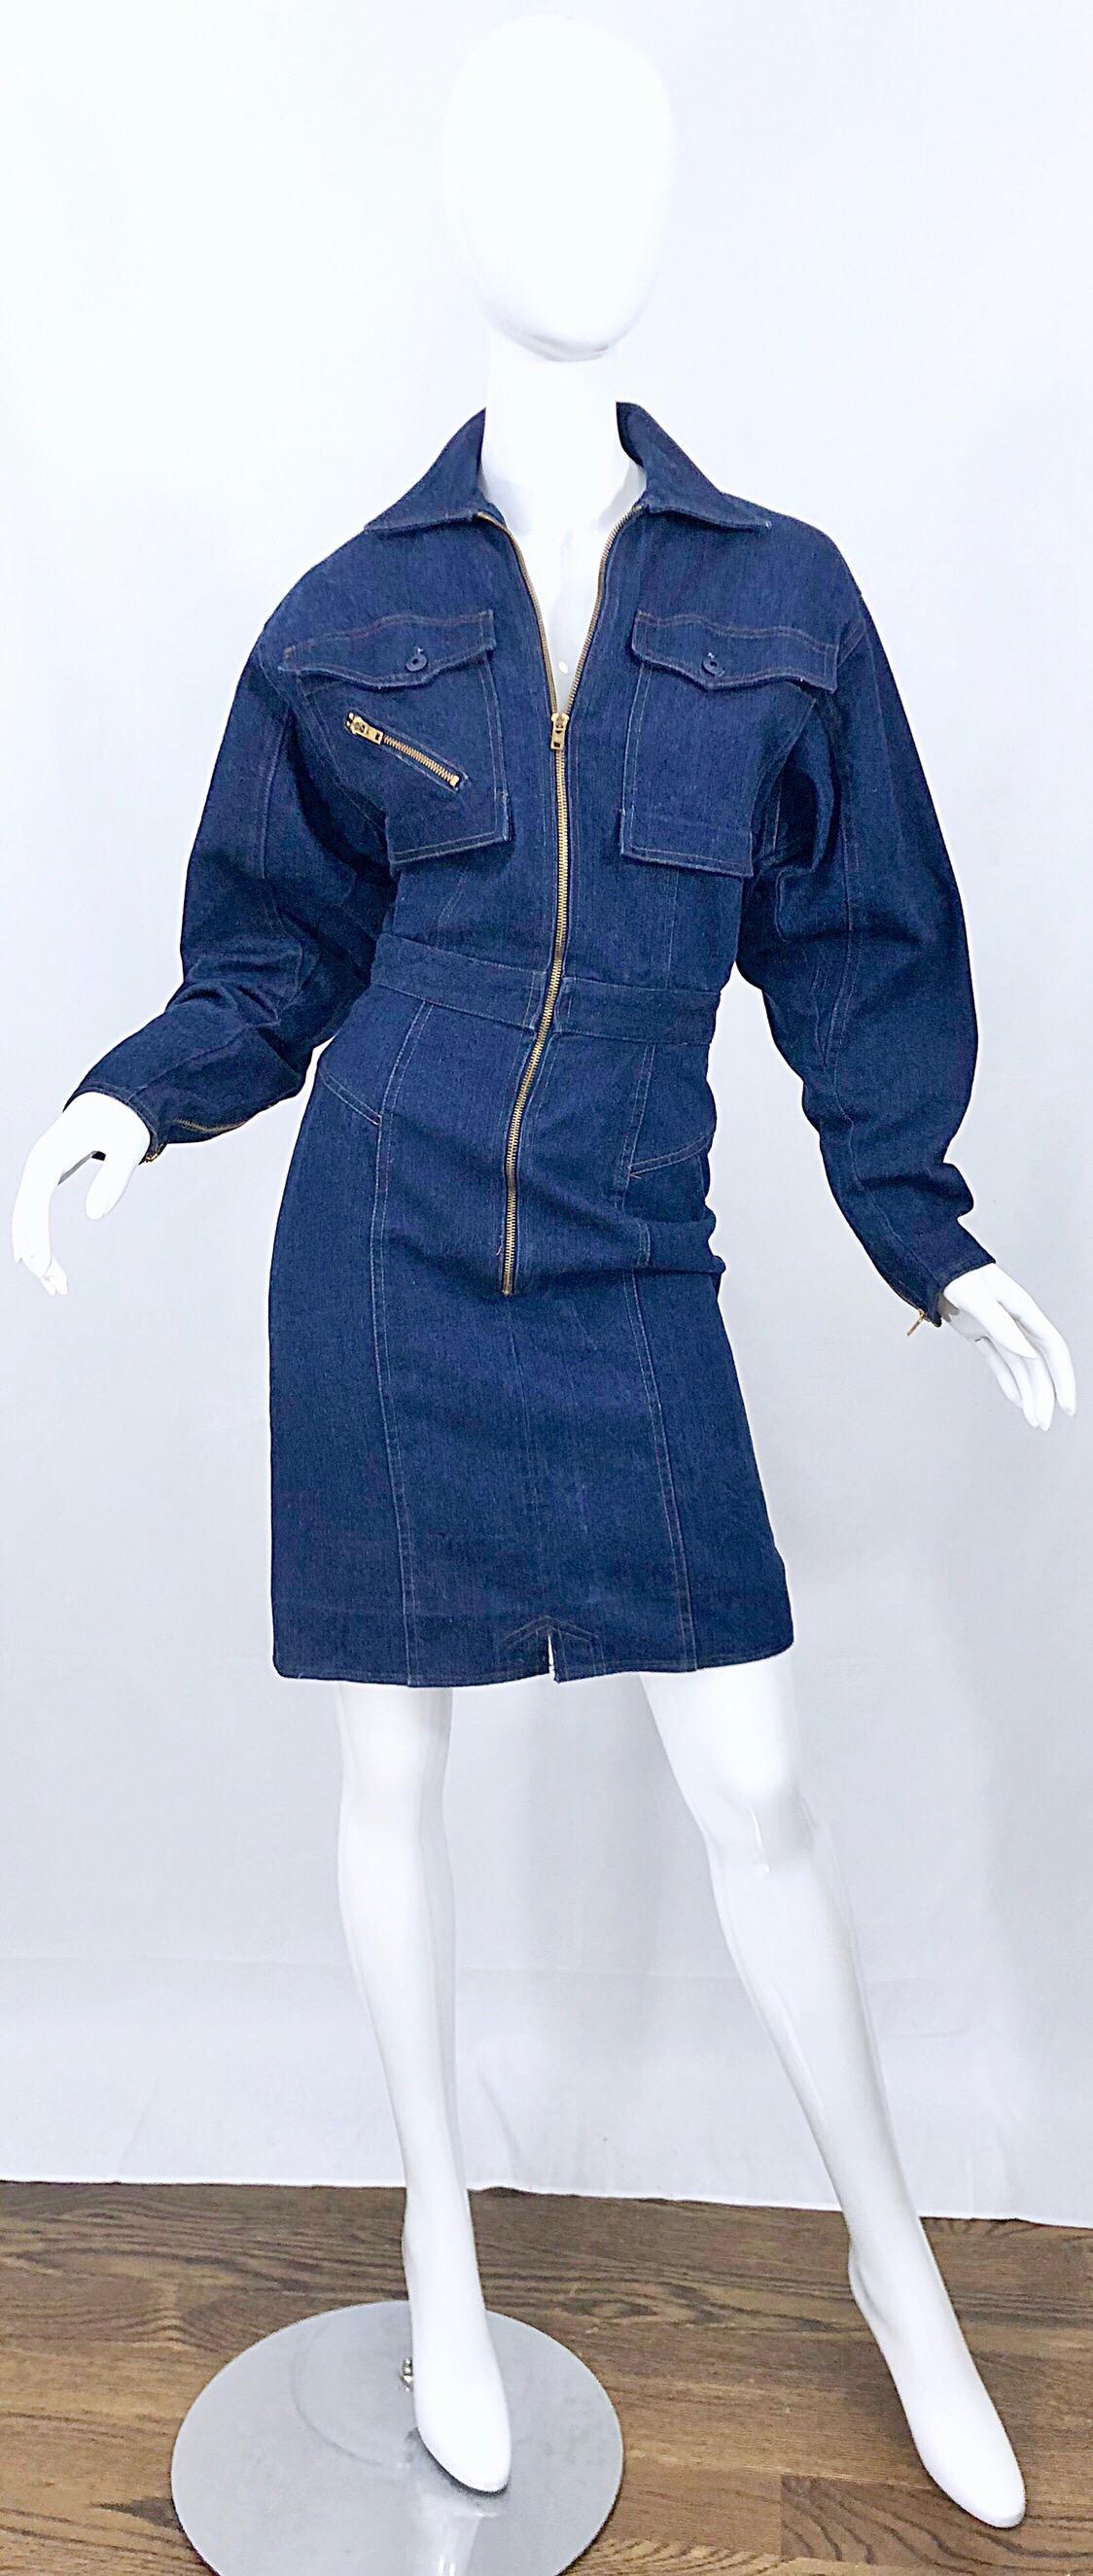 Amazing vintage mid 1980s Avant Garde blue jean denim moto dress! Features a full gold metal zipper up the front, with an asymmetrical zipper on the right breast pocket, and on the back rear. Button closure at each breast pocket. Very well made by